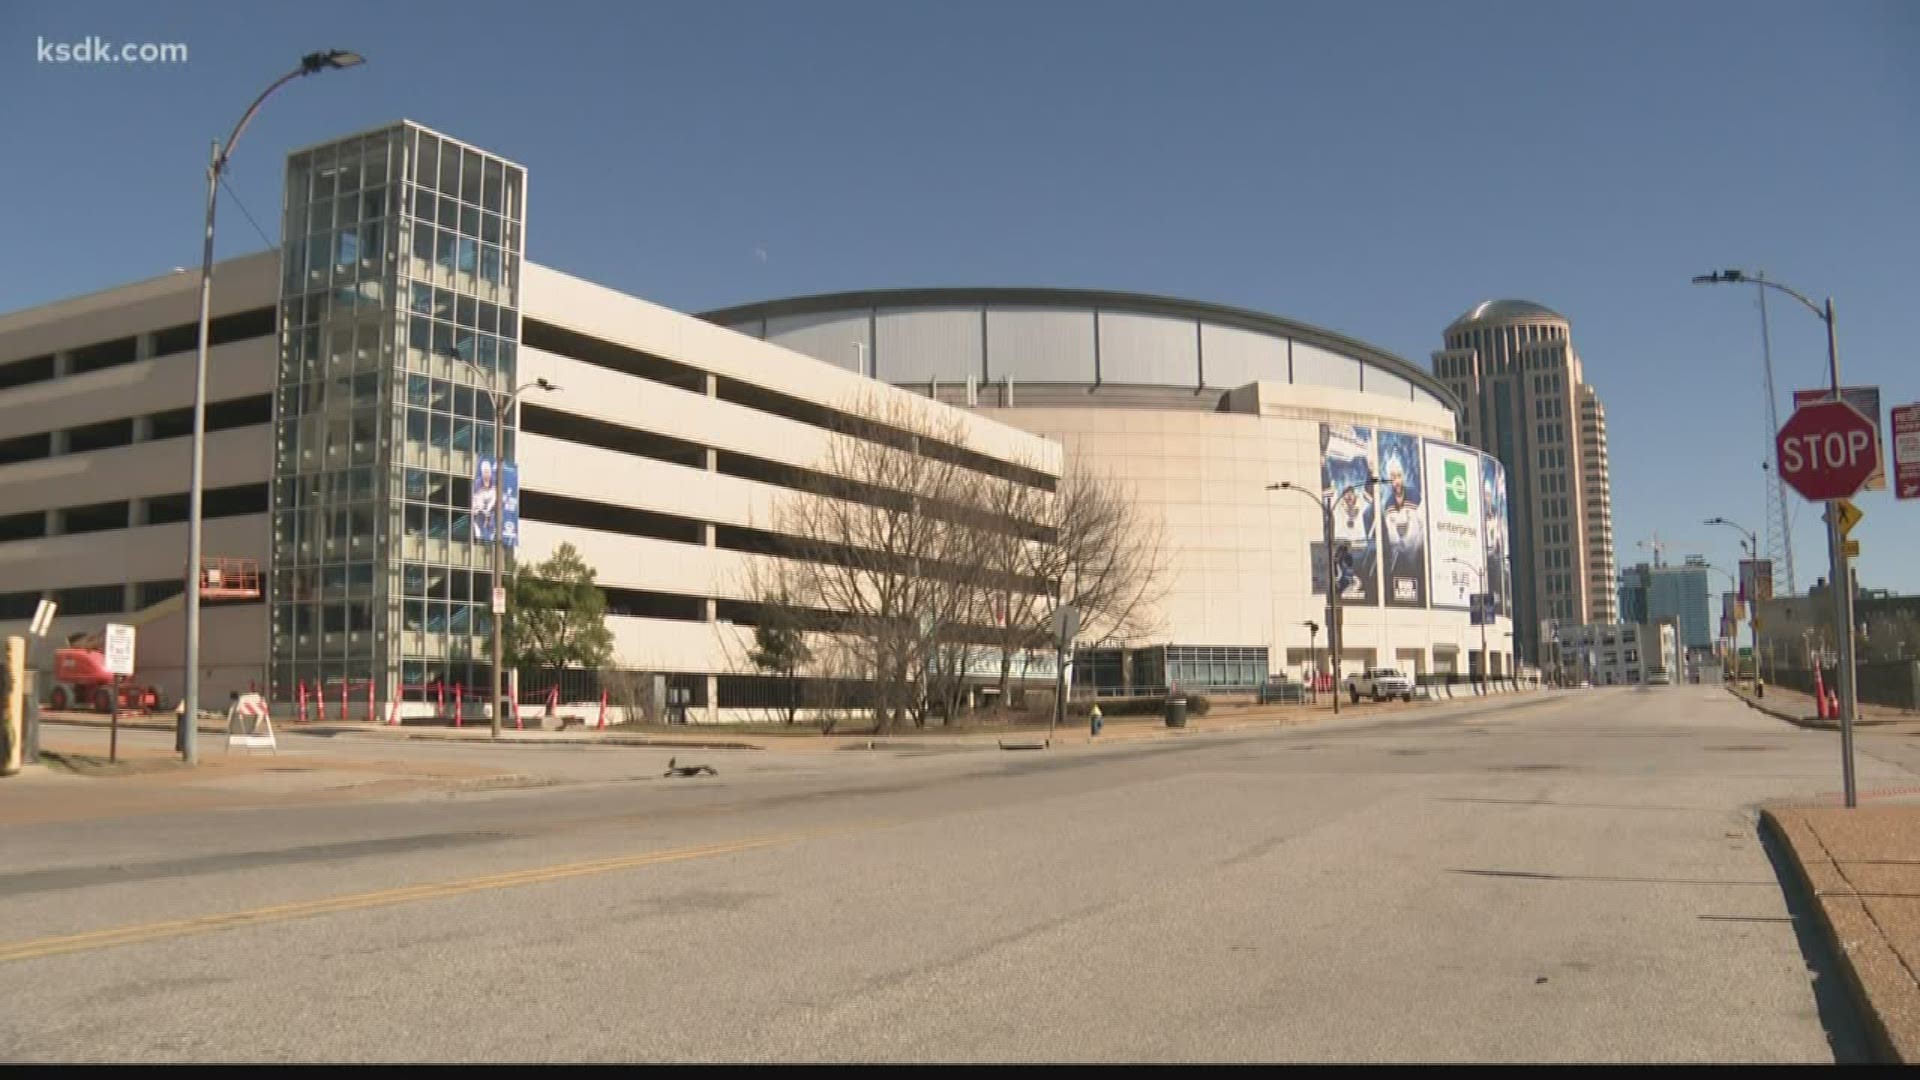 Venues such as Stifel Theatre, the St. Louis Symphony Orchestra and Chaifetz Arena have suspended events.